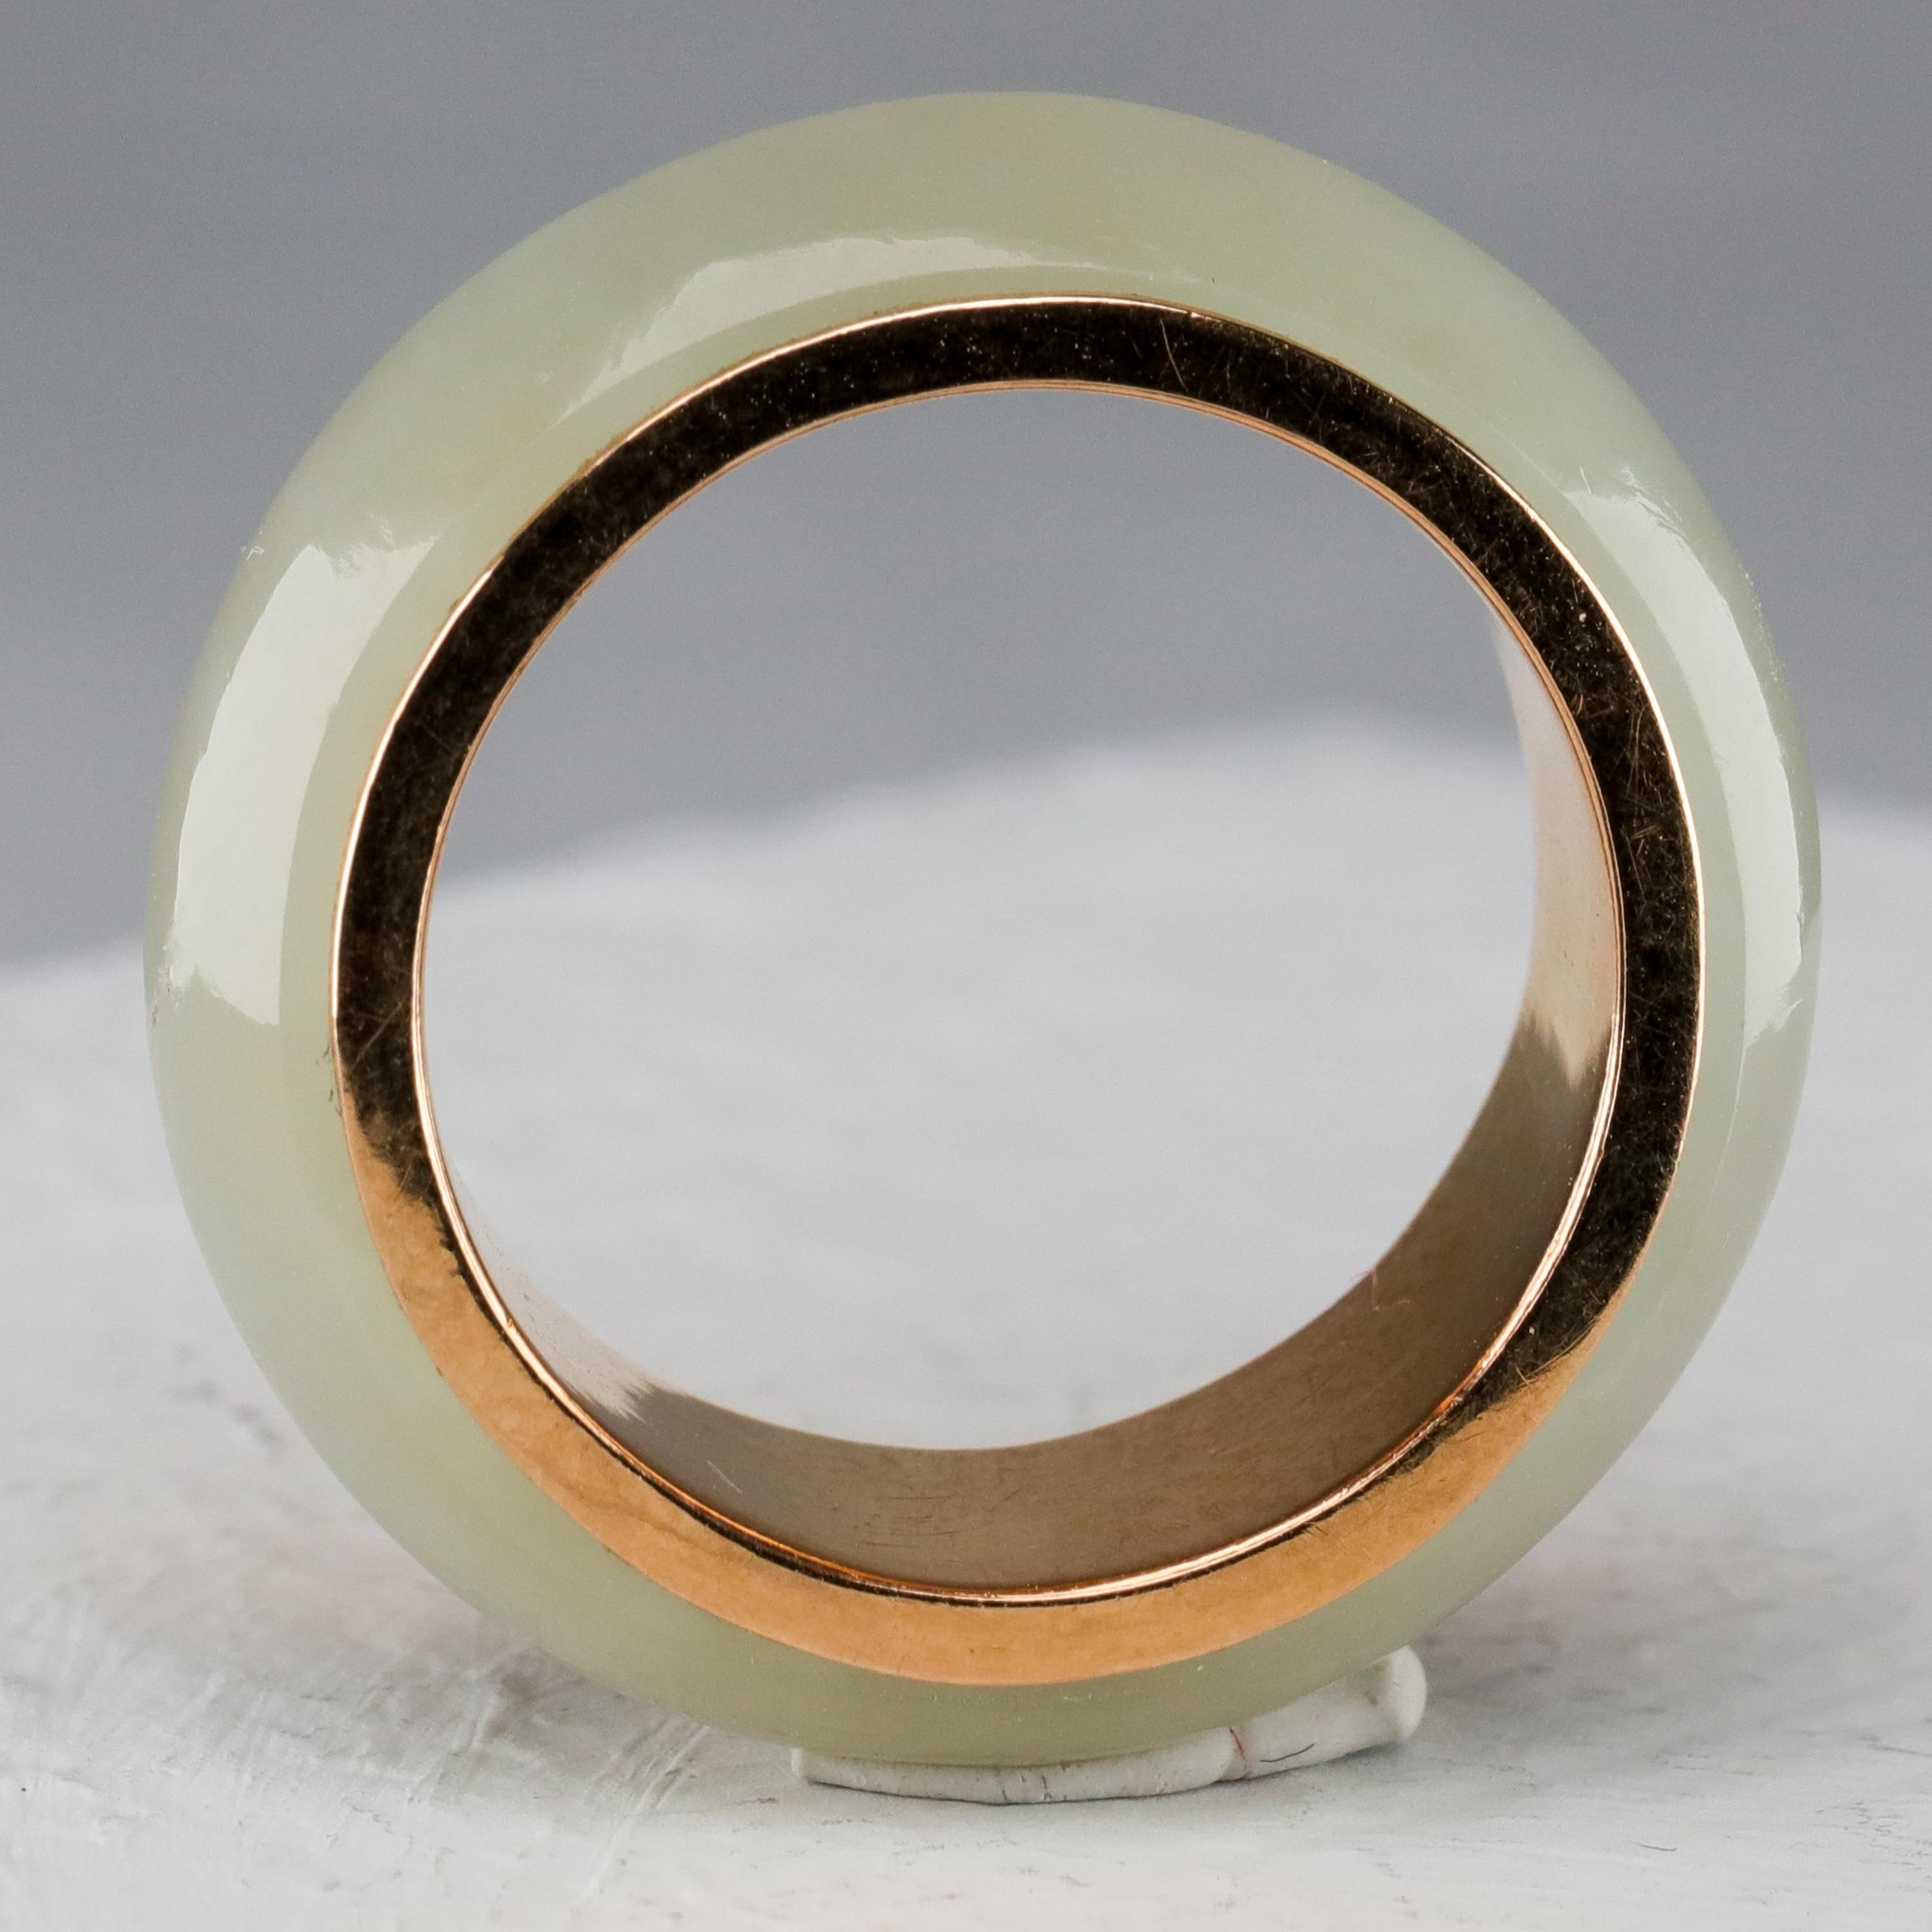 This is a high-quality jade and 14K yellow gold ring created in the 1970s. It features a hand-carved 100% natural and untreated (certified) nephrite jade ring in very pale green surrounding a solid 14K gold band. The jade has a luminous translucency